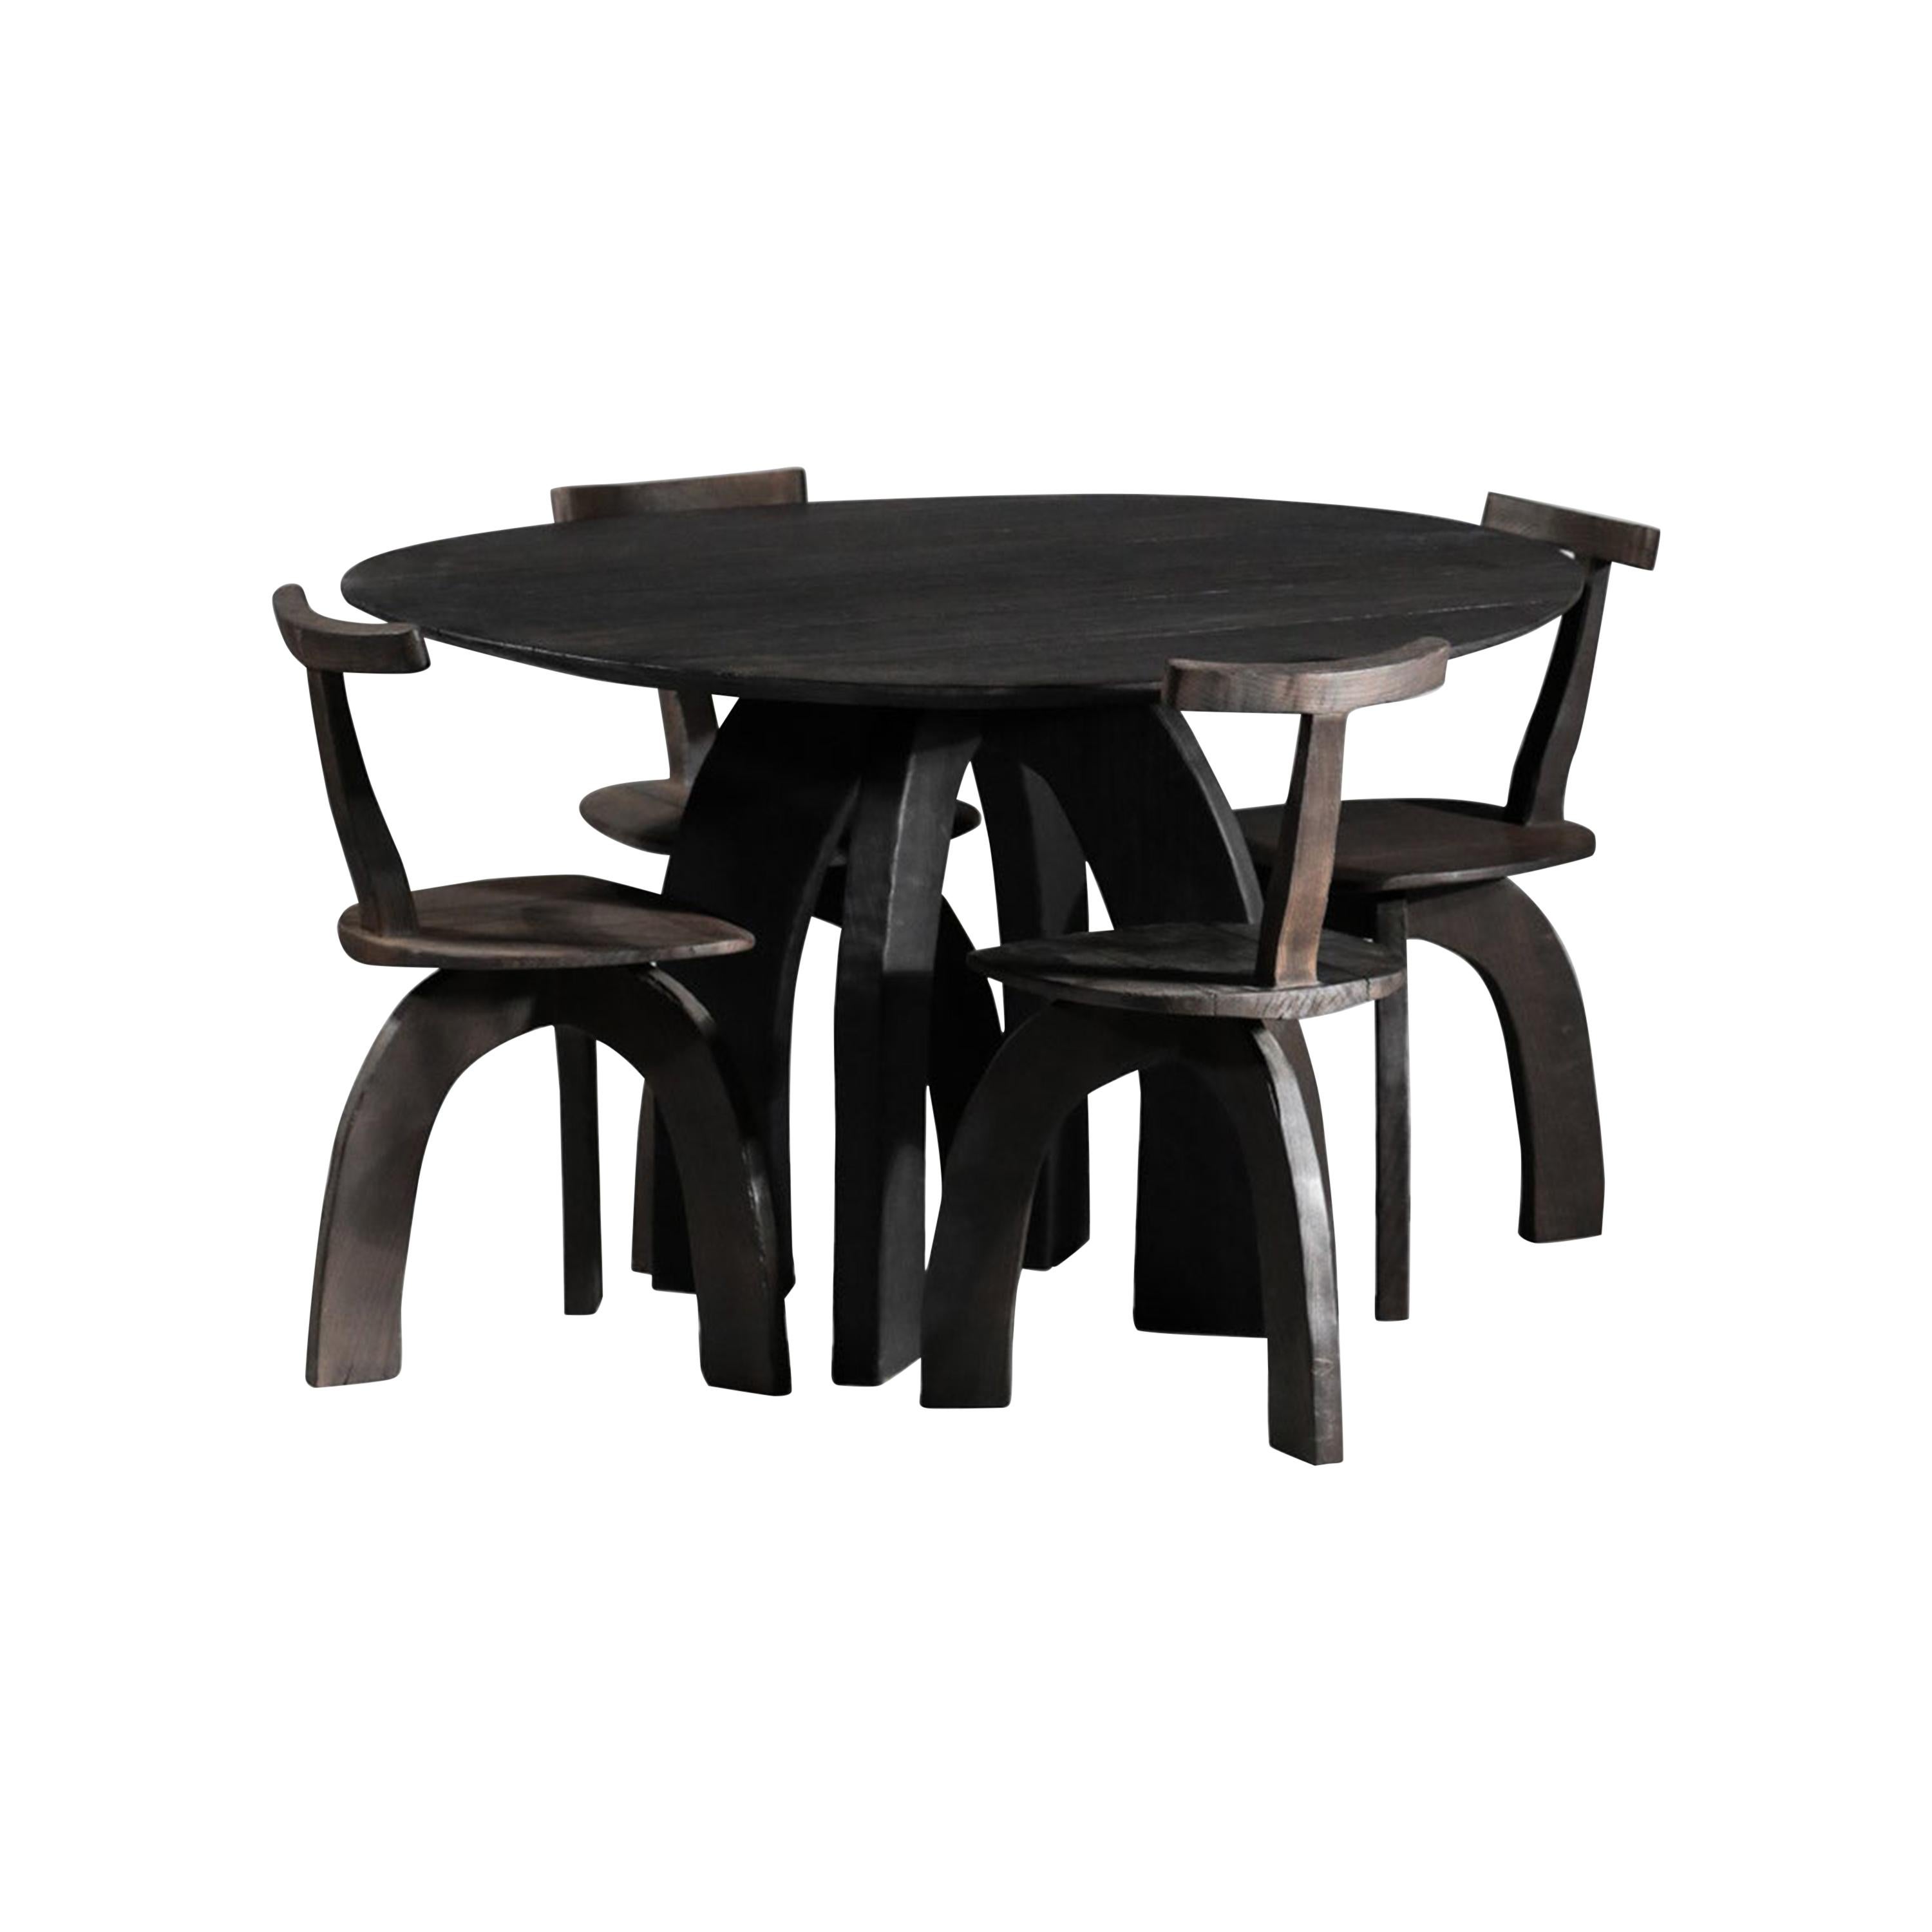 Artisanal Dining Set Round Table and Chairs by Vincent Vincent 80/20 Burnt Wood